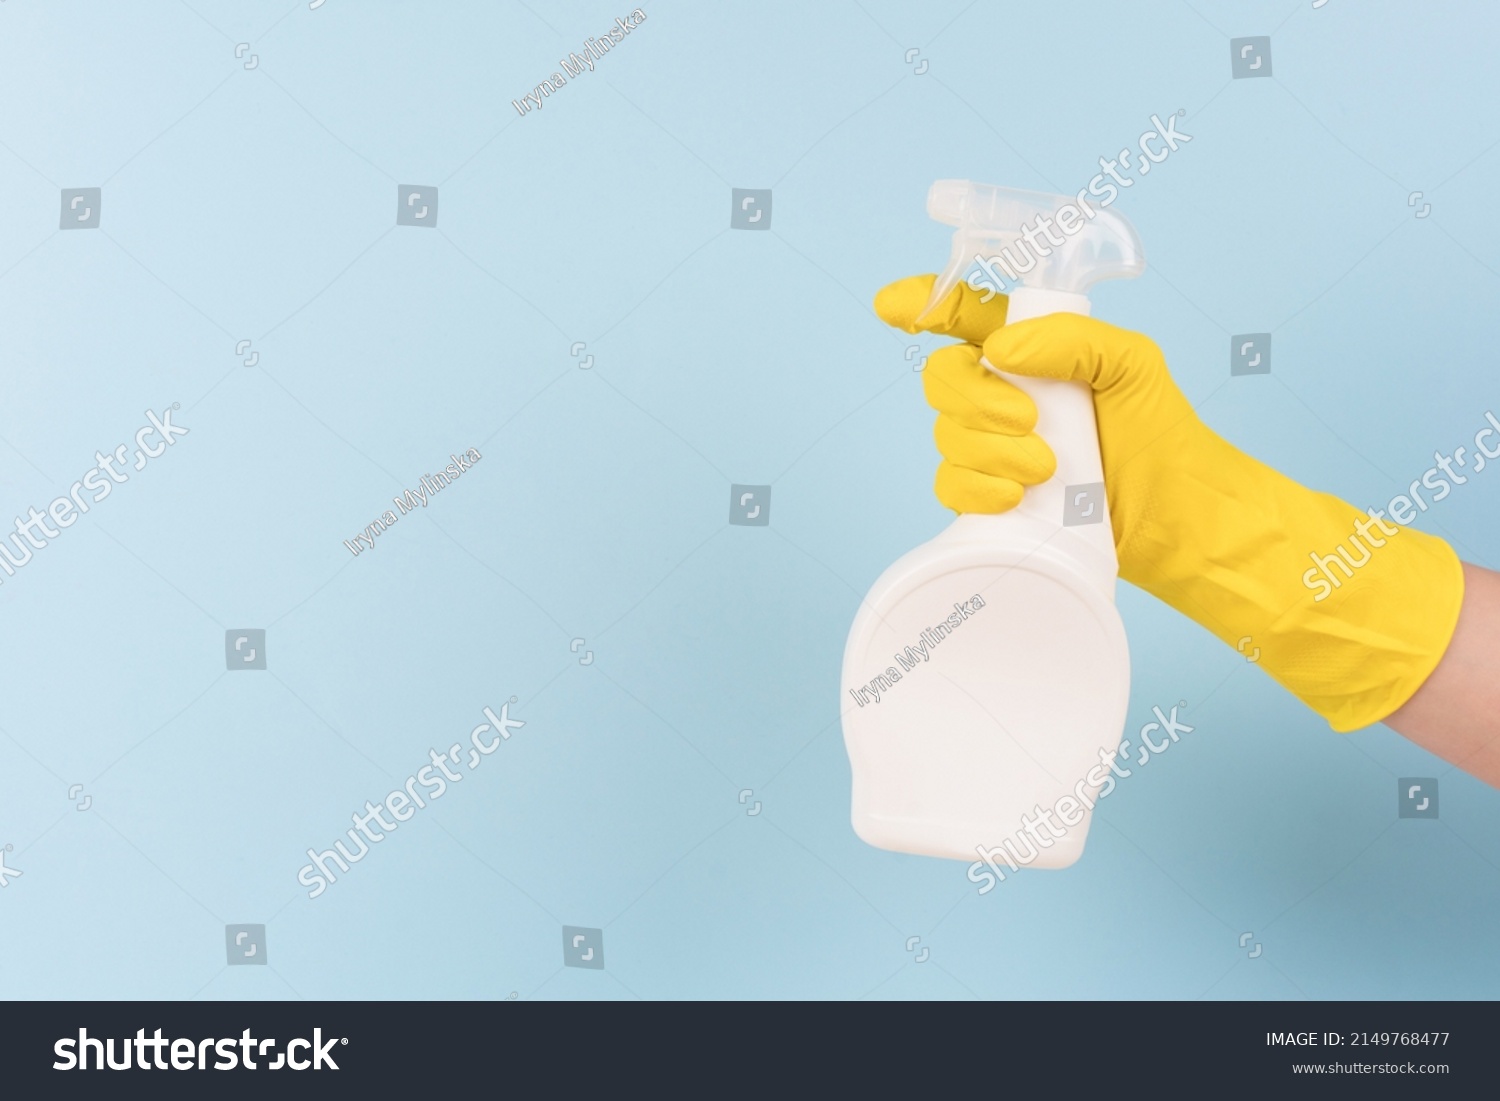 Hand in yellow protective rubber glove holding spray bottle with detergent against blue background with copy space. Cleaning product for different kitchen or bathroom surfaces. Bleach. Mockup #2149768477